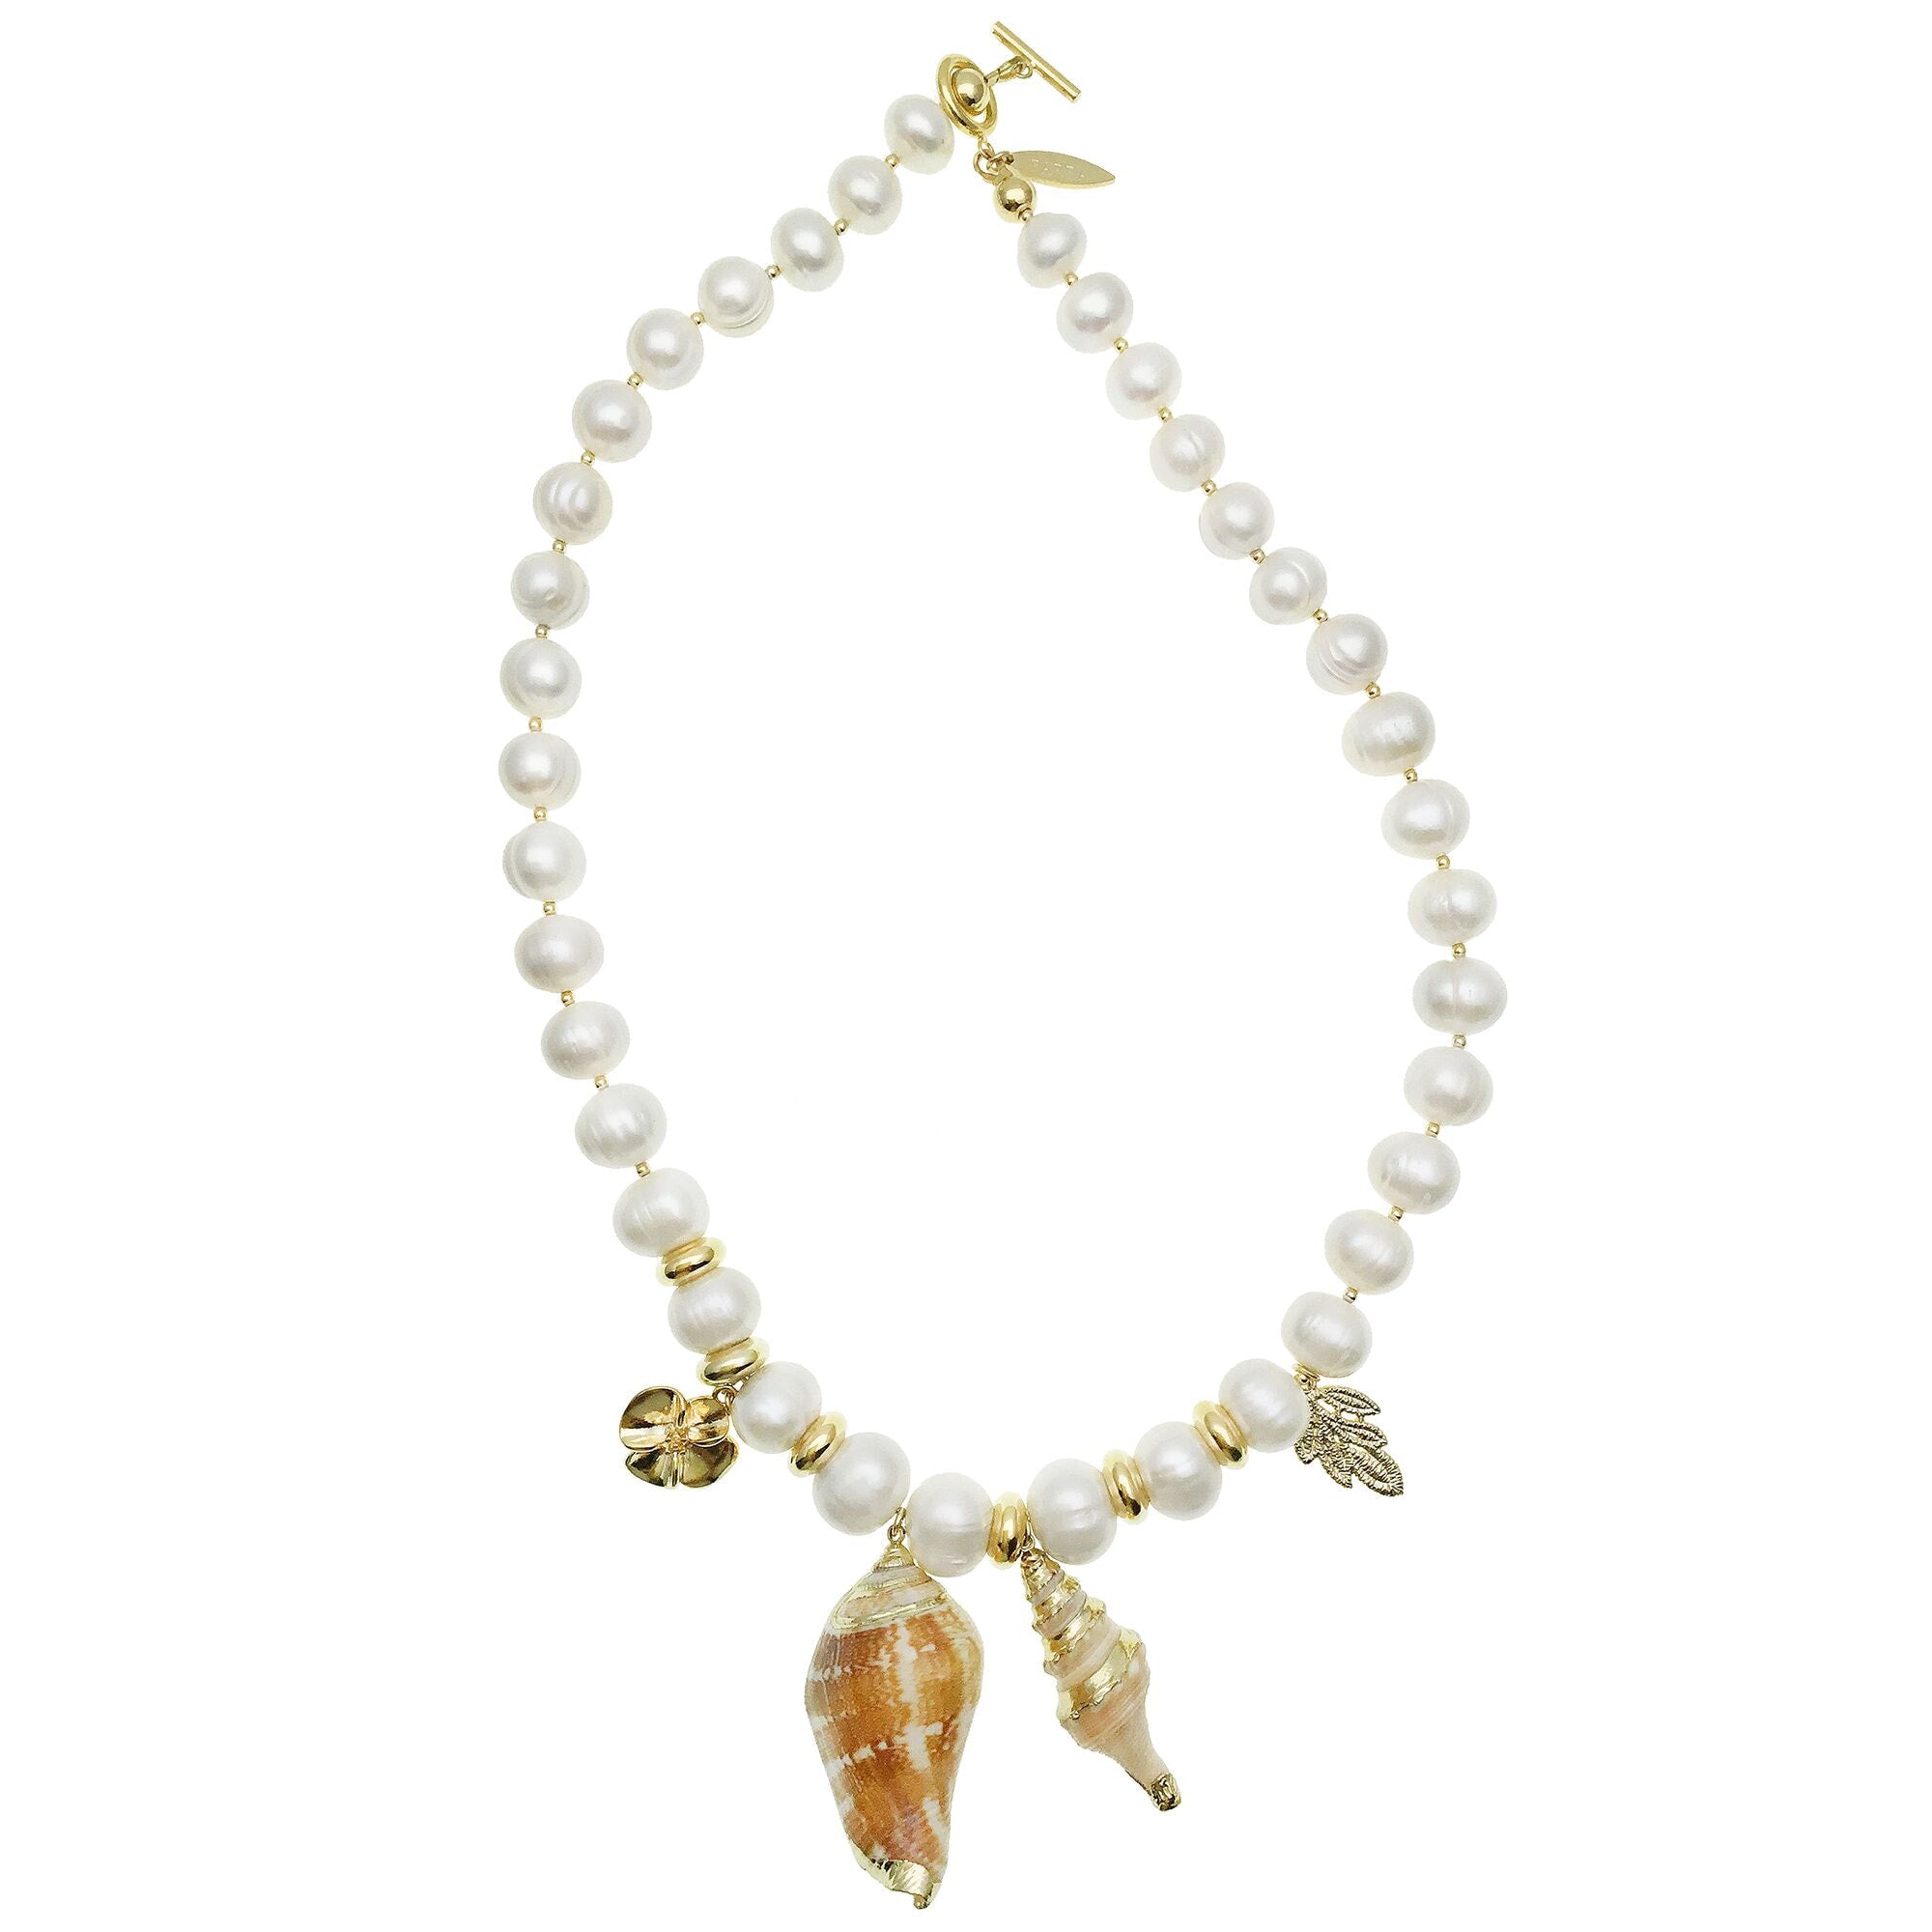 Pearl and Shell Charm Necklace - shop idPearl